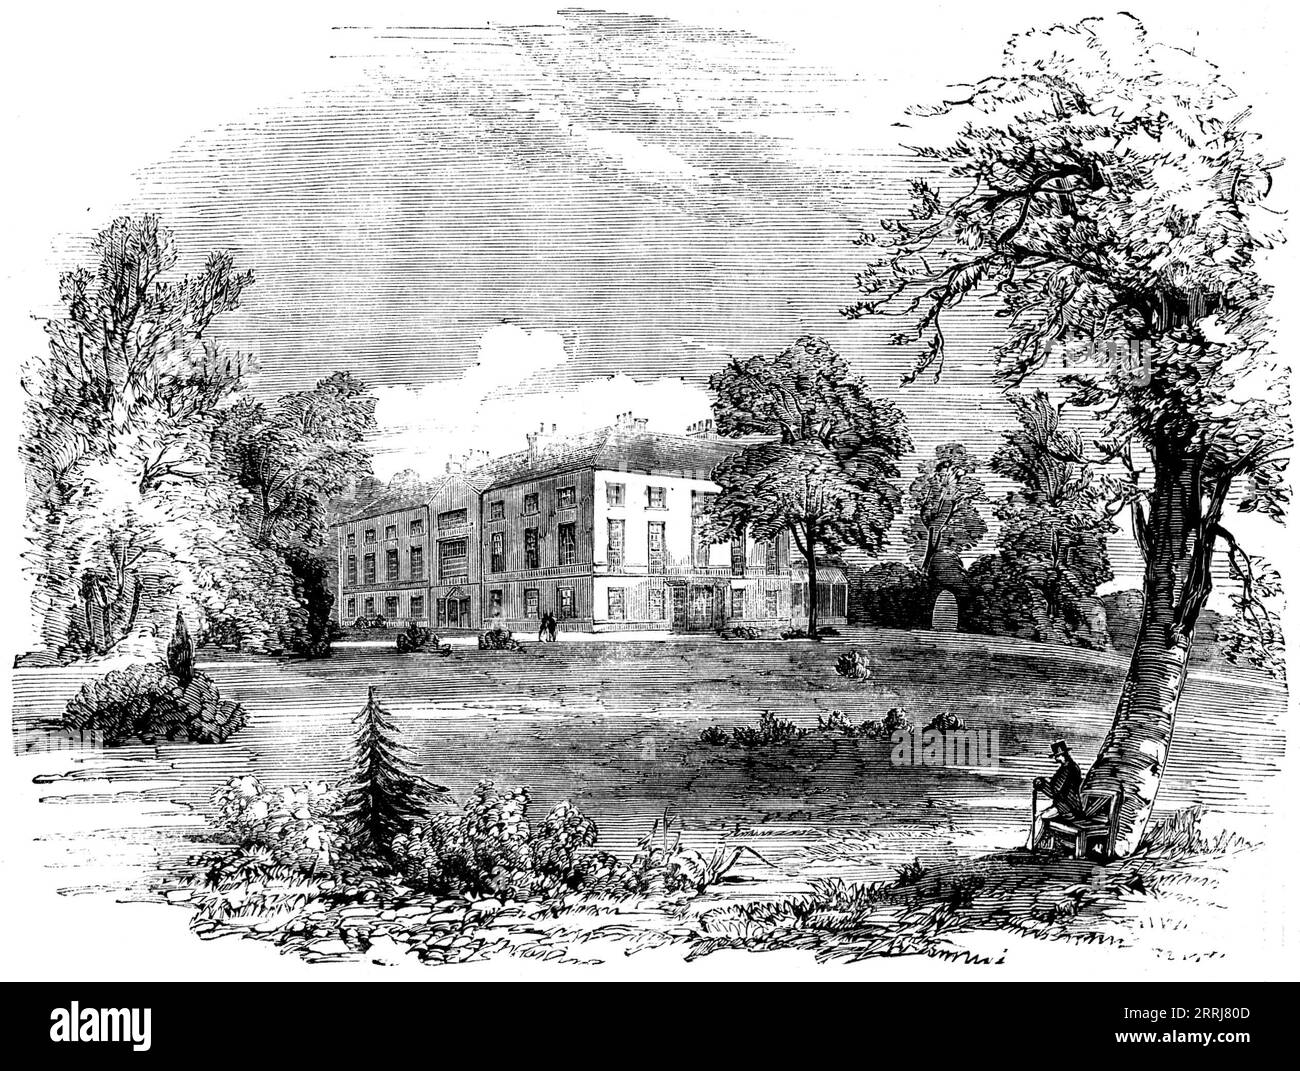 Tapton House, near Chesterfield, the Residence of the Late Mr. G. Stephenson, 1858. 'Chesterfield has acquired a celebrity by its connection with the memory of the late celebrated George Stephenson...Across the valley to the right, on the summit of a hill, stands Tapton House, where Mr. Stephenson resided during the last ten years of his life, and where many of his most important plans were formed and perfected. Tapton House is a large, commodious mansion, beautifully situated amidst woods, and surrounded by a park...When Mr. Stephenson took possession of Tapton House the gardens and pleasure- Stock Photo